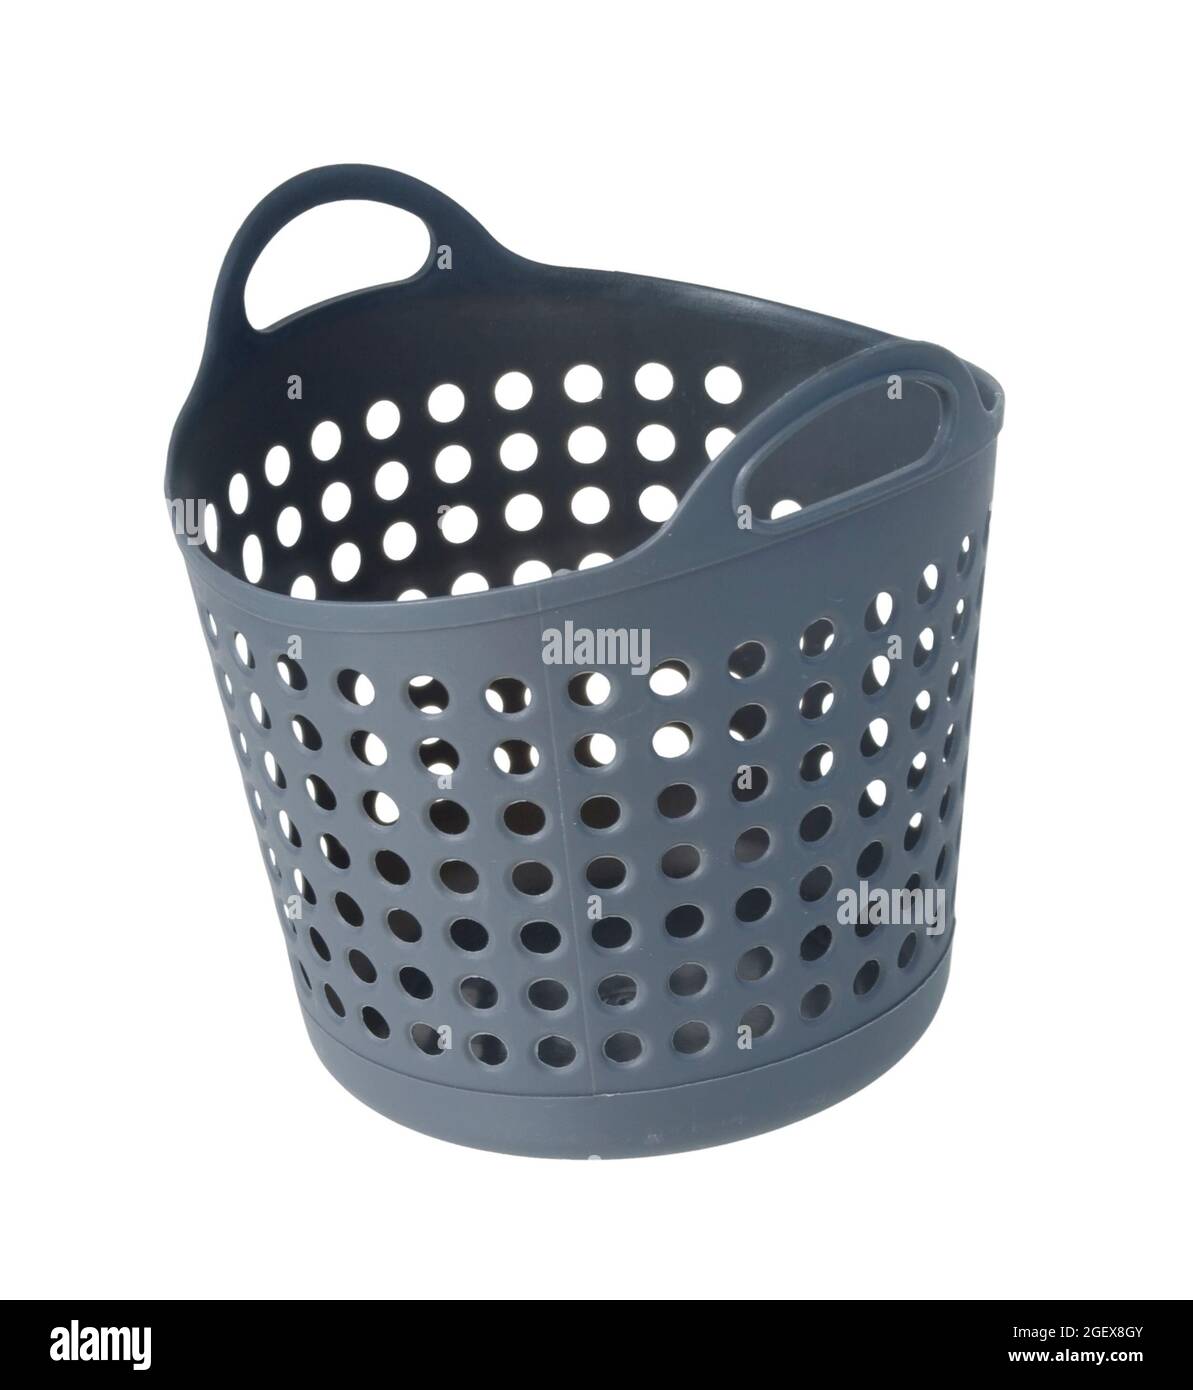 Laundry basket with holes along the sides - path included Stock Photo -  Alamy